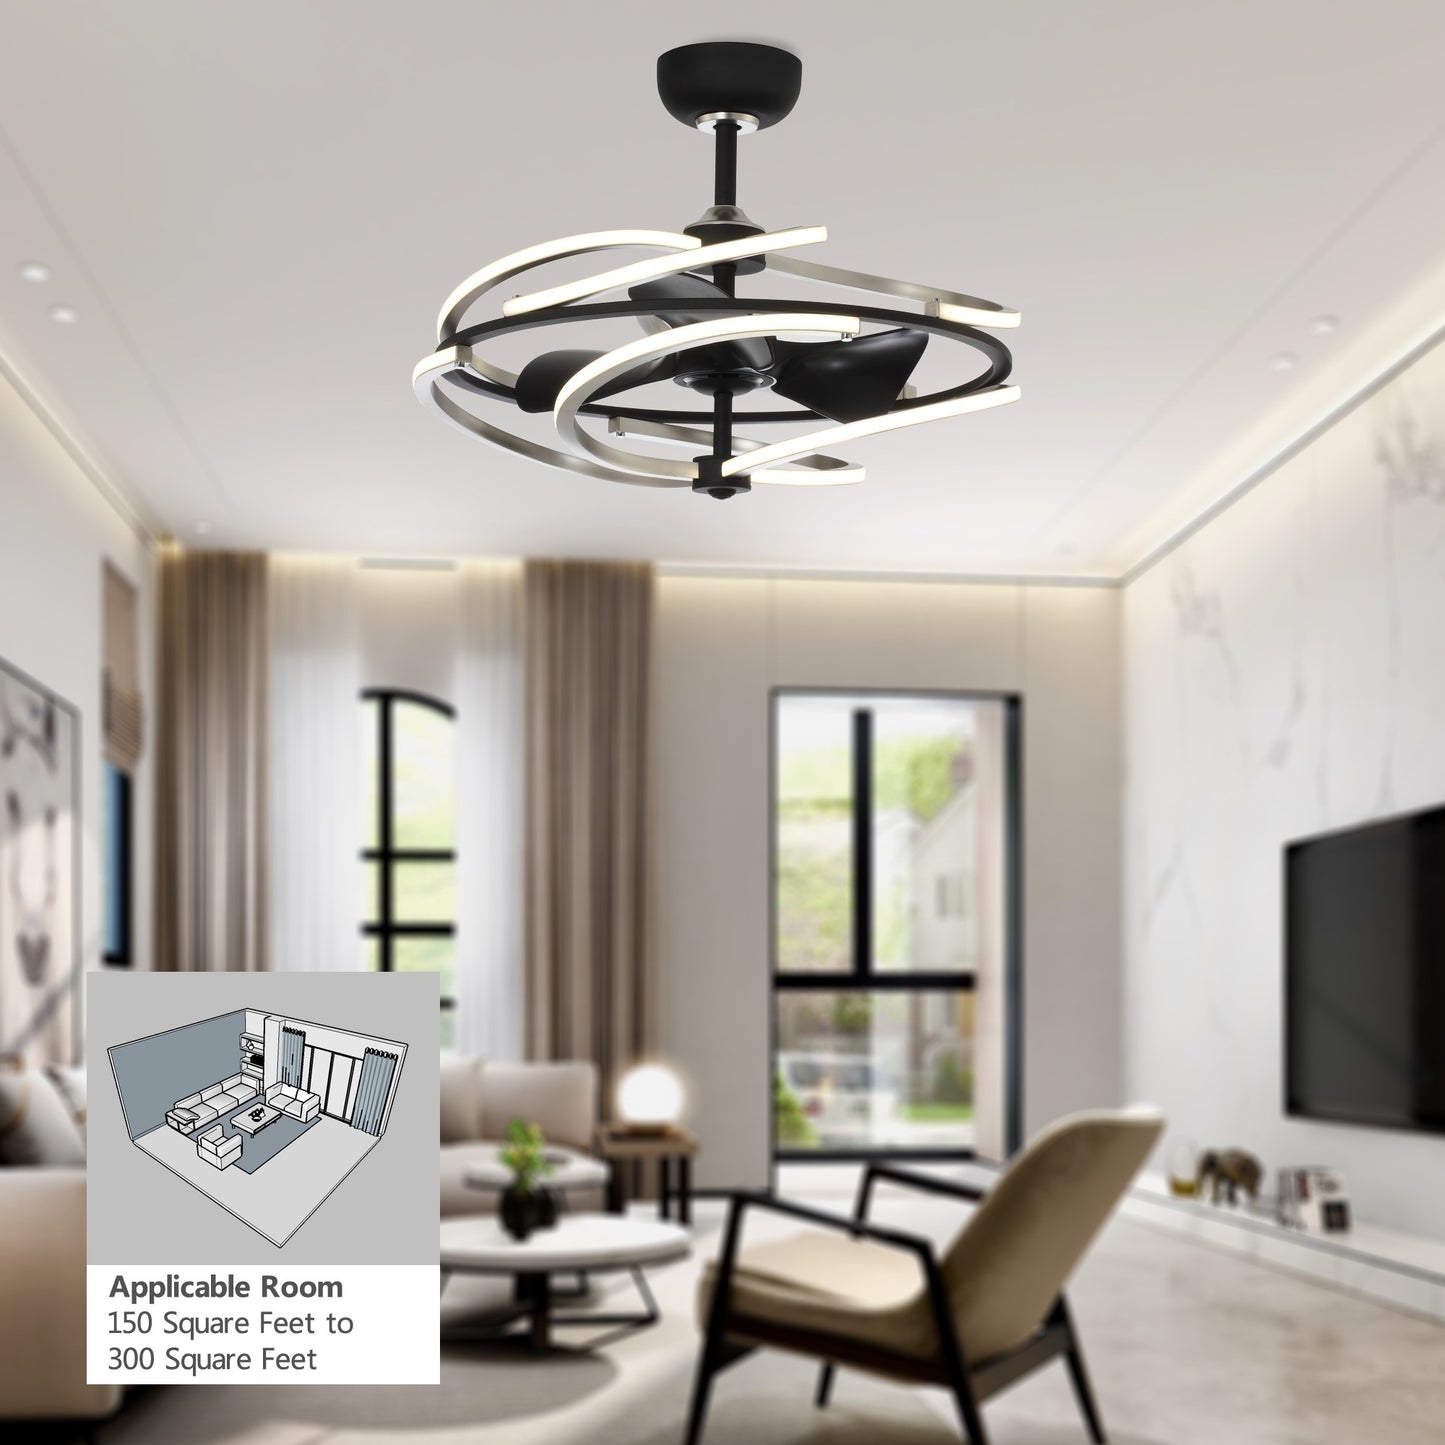 56W LED Light Strip Ceiling Fan with Double Color Frame - 28.3 in.